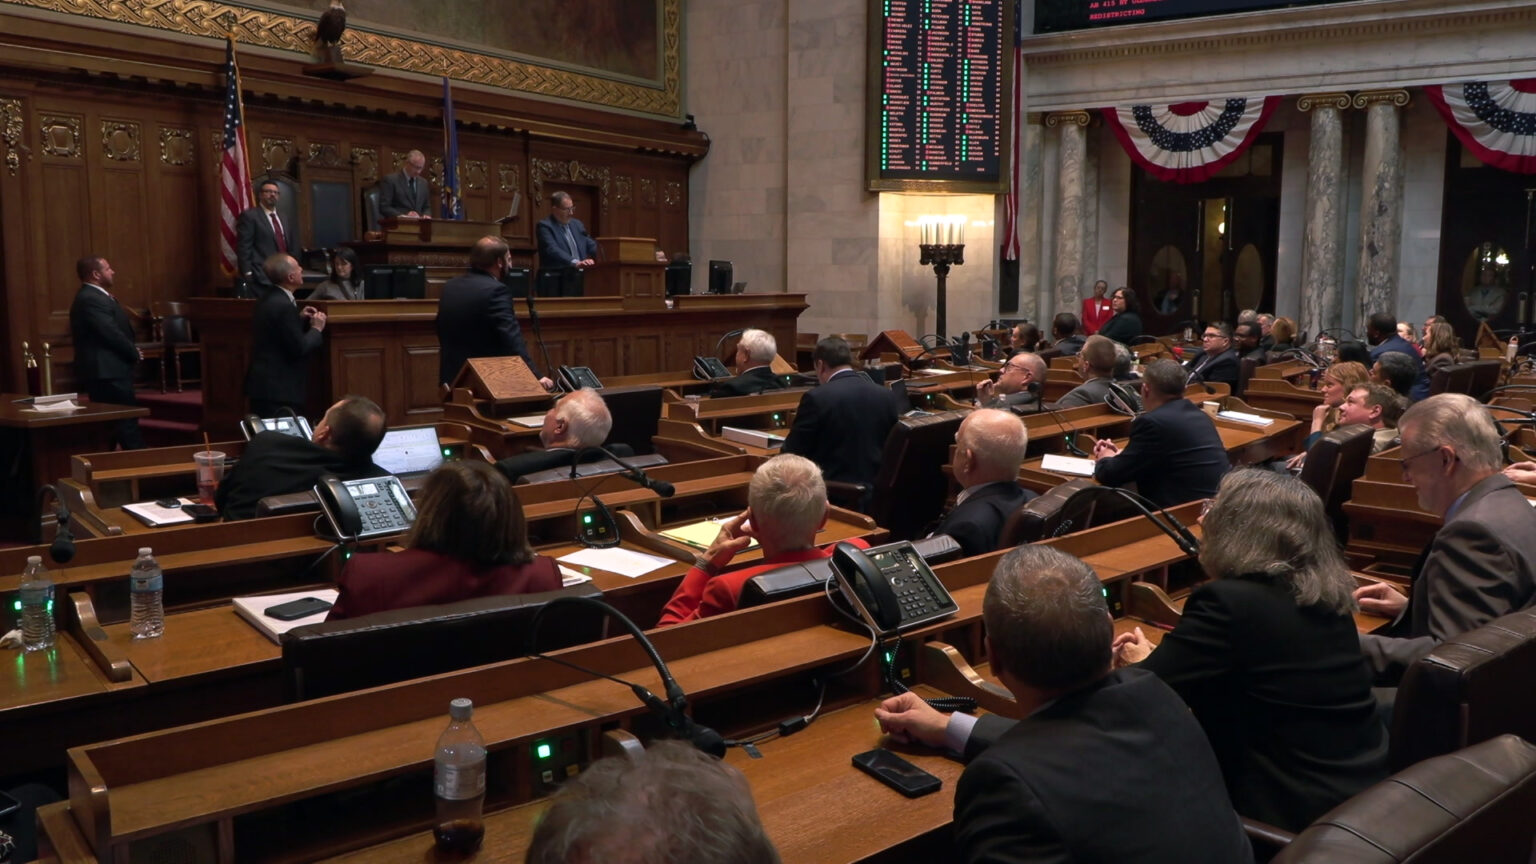 Legislators sit in high-backed leather chairs in multiple rows of desks facing a wood legislative dais where people are sitting and standing, with a U.S. and Wisconsin flags, a taxidermy bald eagle and large painting behind it, a digital vote register to the side of the dais, in a room with marble pillars and masonry.